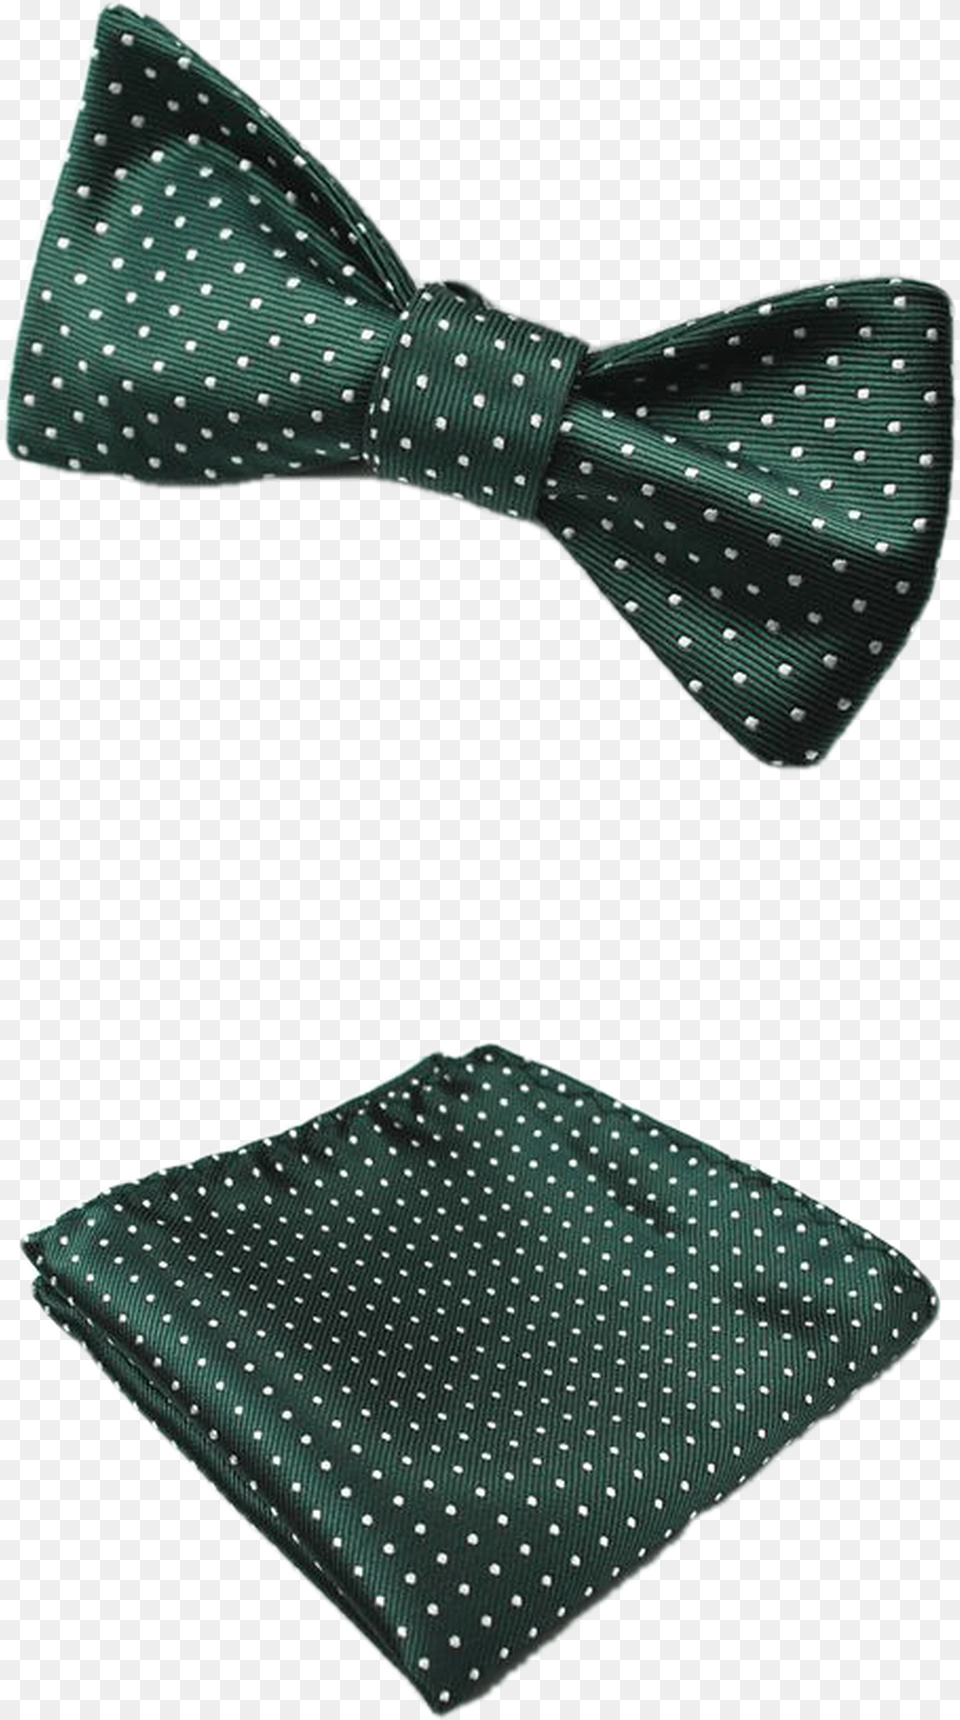 Green And White Polka Dot Bow Tie And Pocket Square Polka Dot, Accessories, Formal Wear, Bow Tie, Pattern Png Image